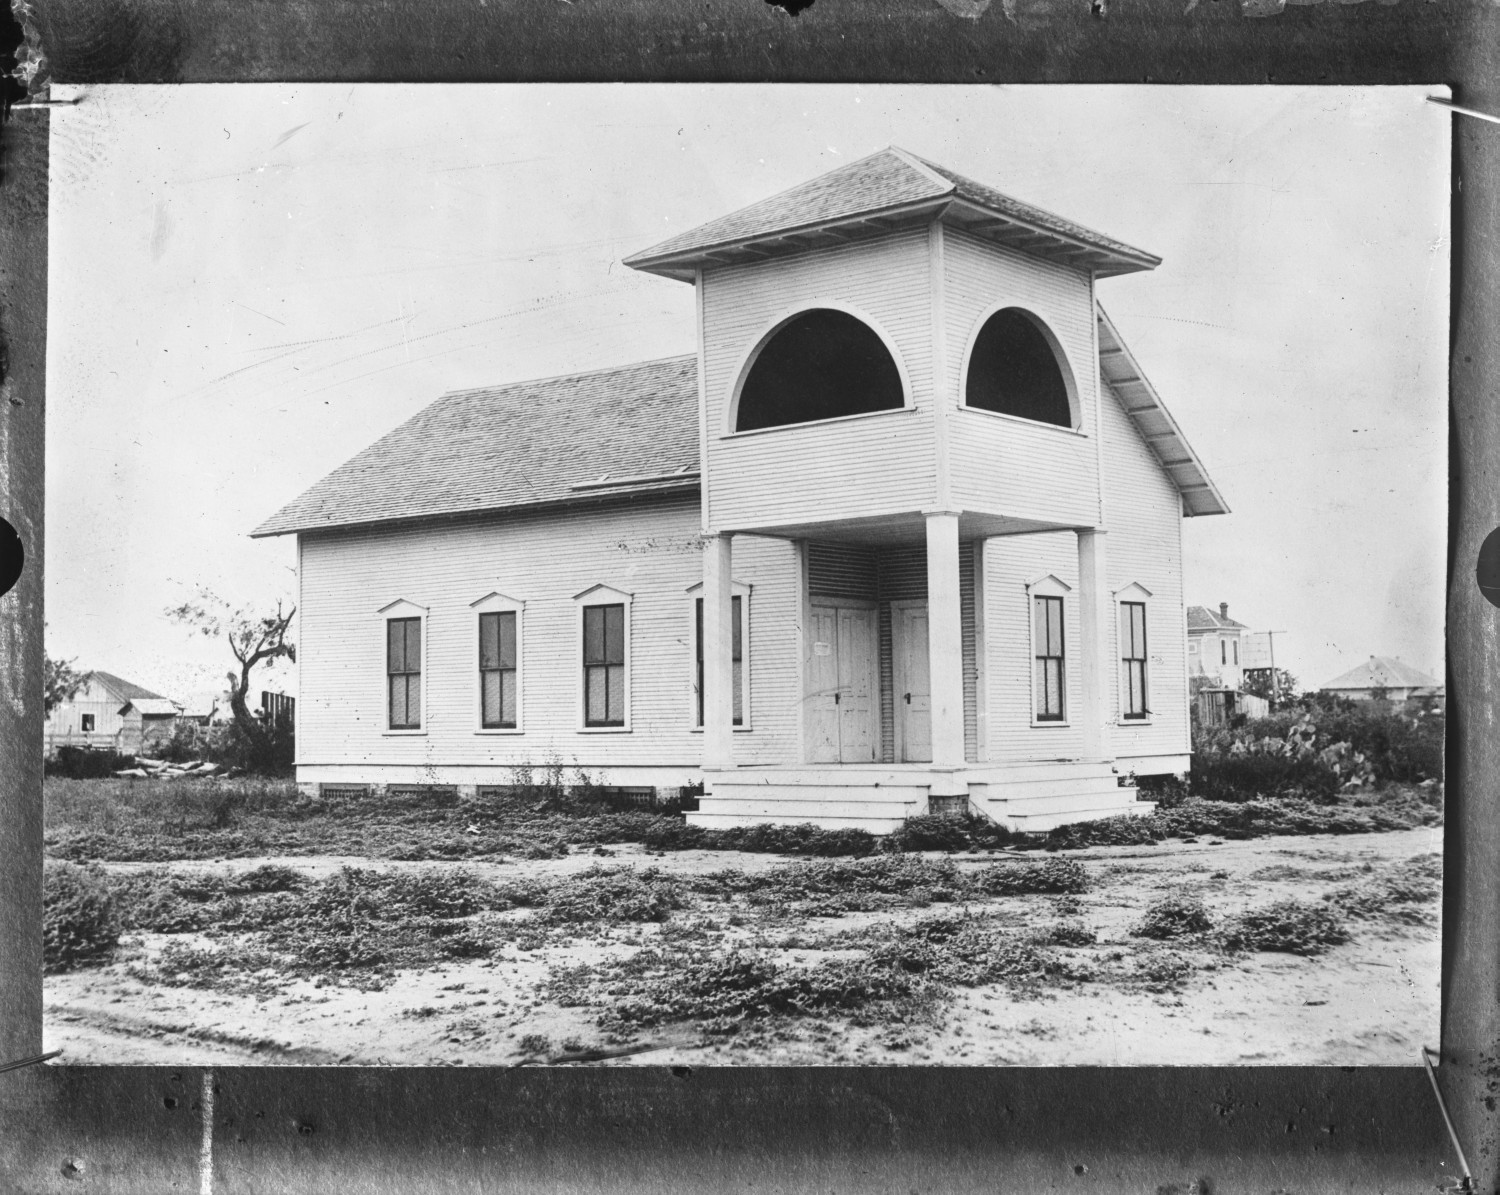 [Unidentified building from the Shary Collection]
                                                
                                                    [Sequence #]: 1 of 1
                                                